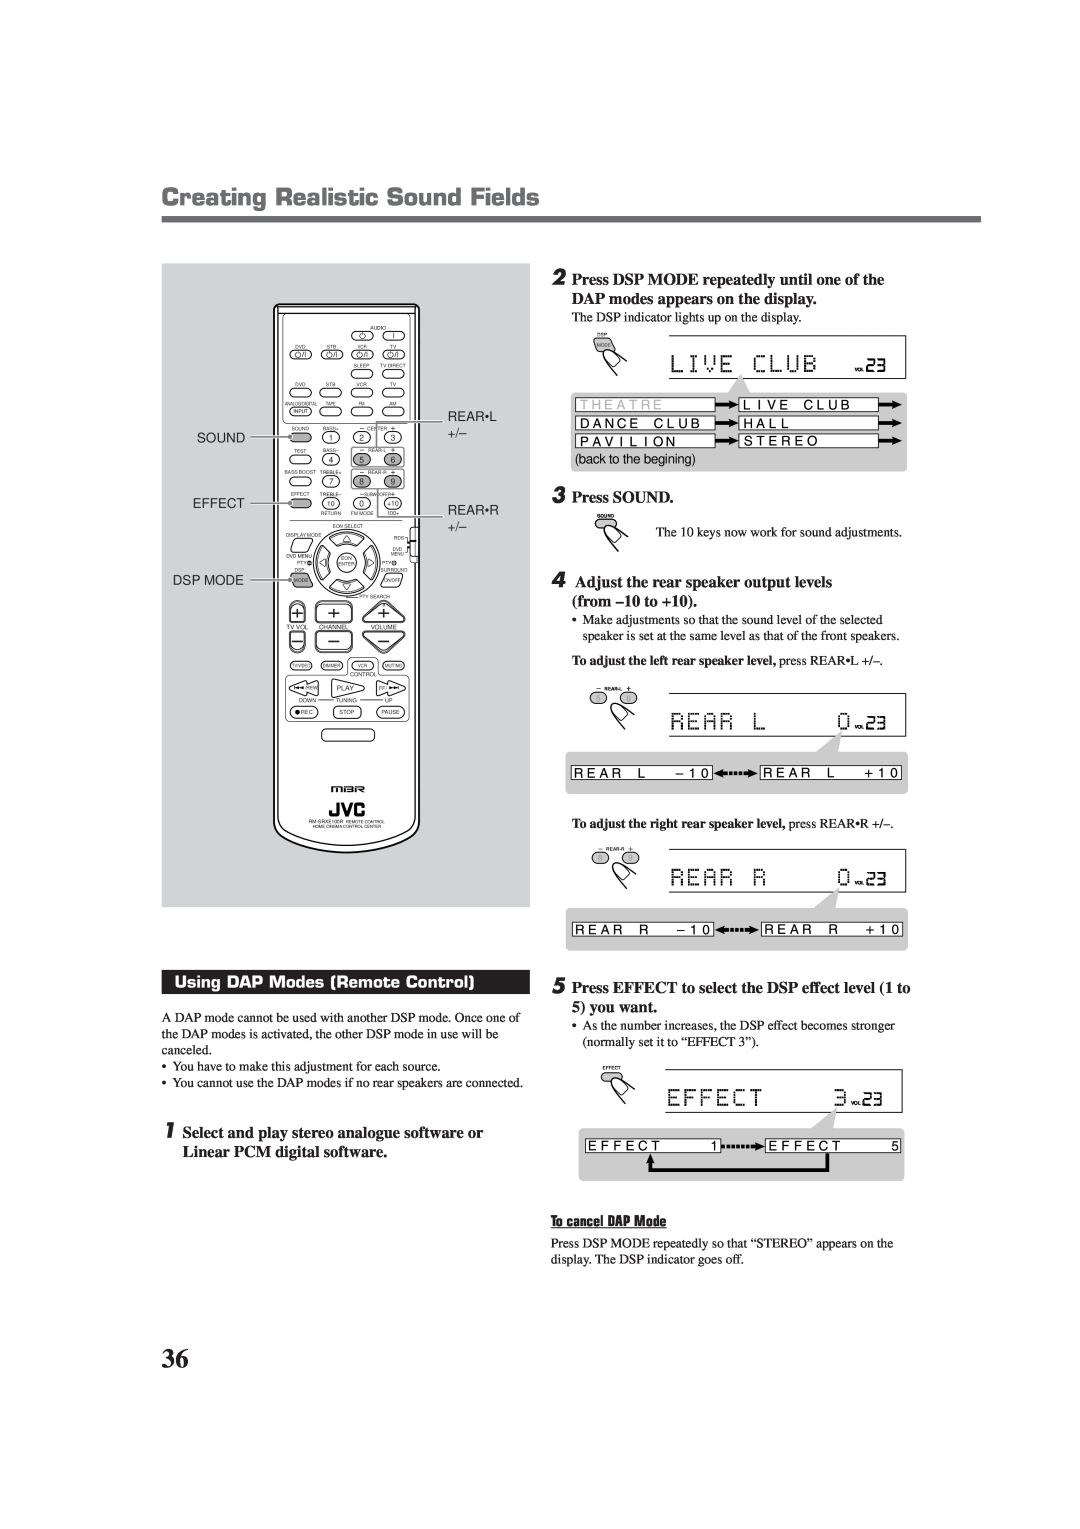 JVC RX-E100RSL manual 2Press DSP MODE repeatedly until one of the, DAP modes appears on the display, 3Press SOUND, you want 